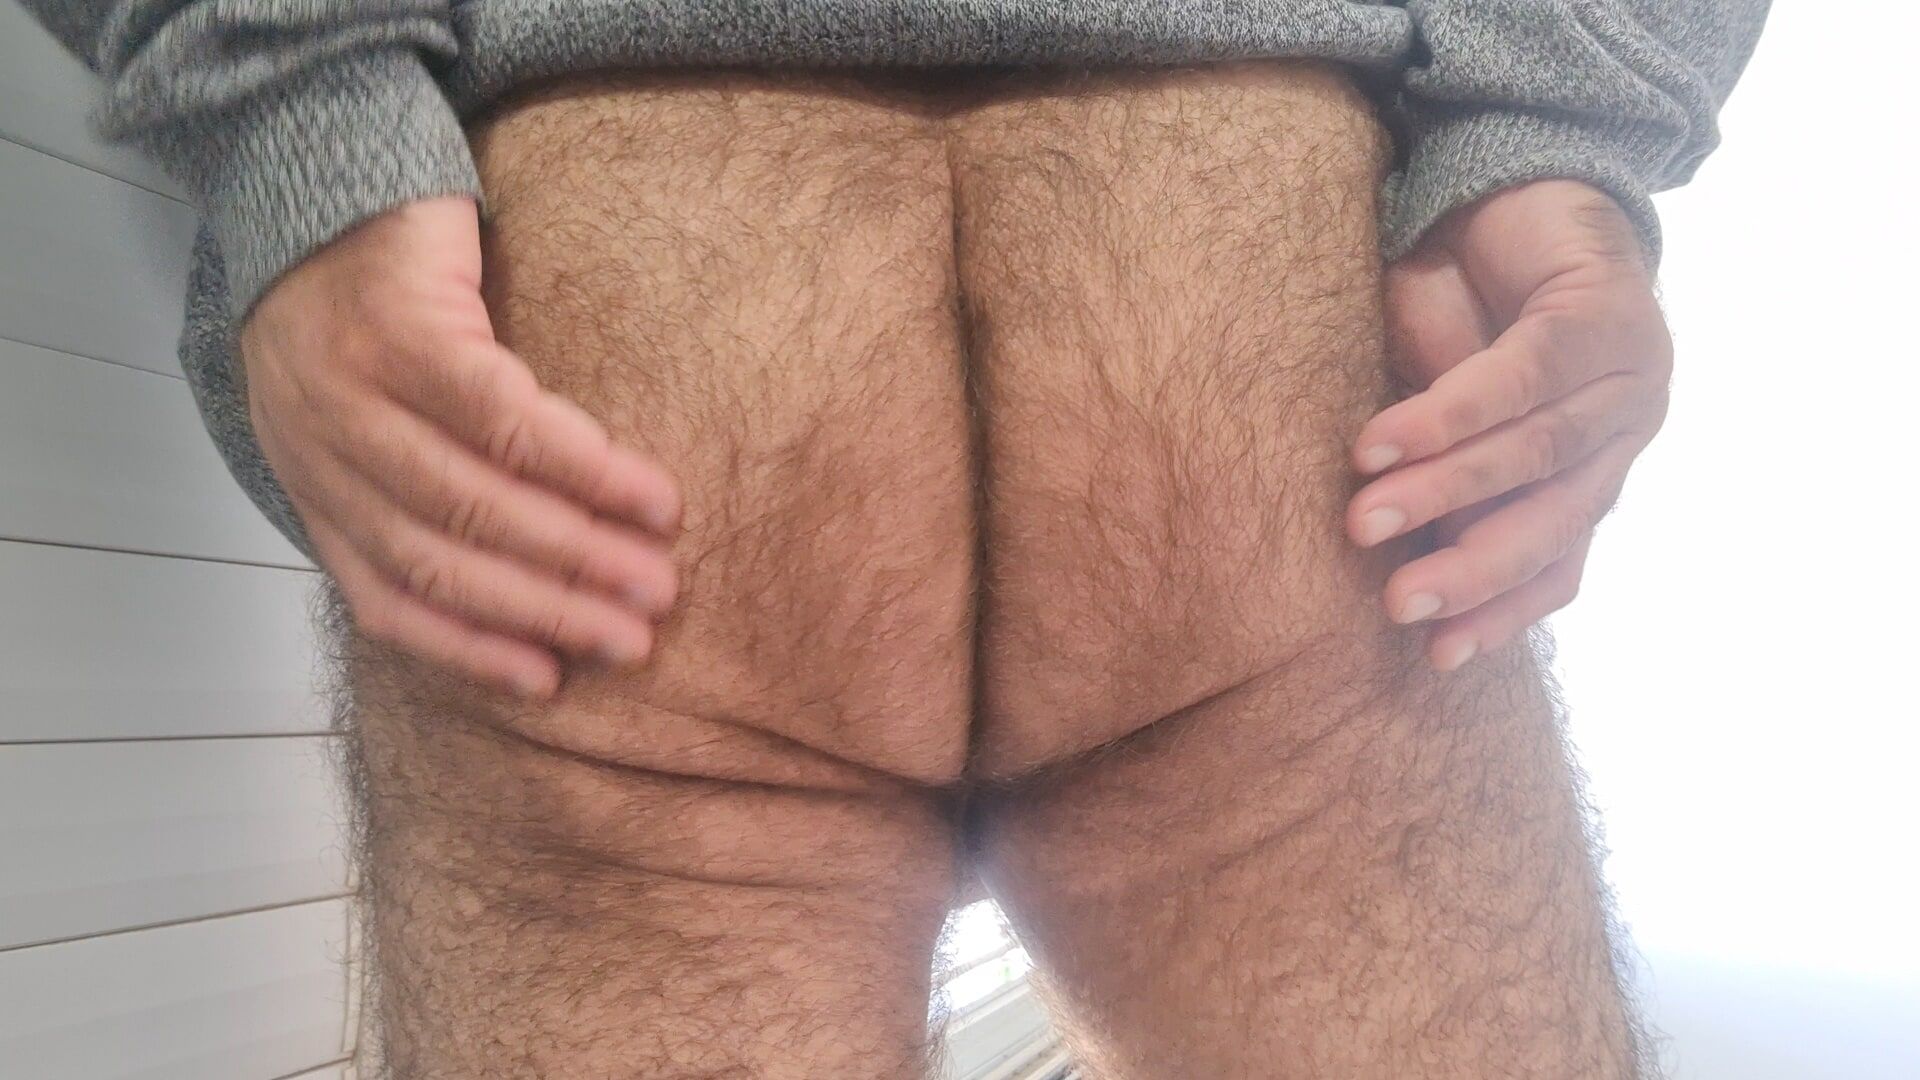 If you're into bear ass - this one's for you! ilovetobenaked #25